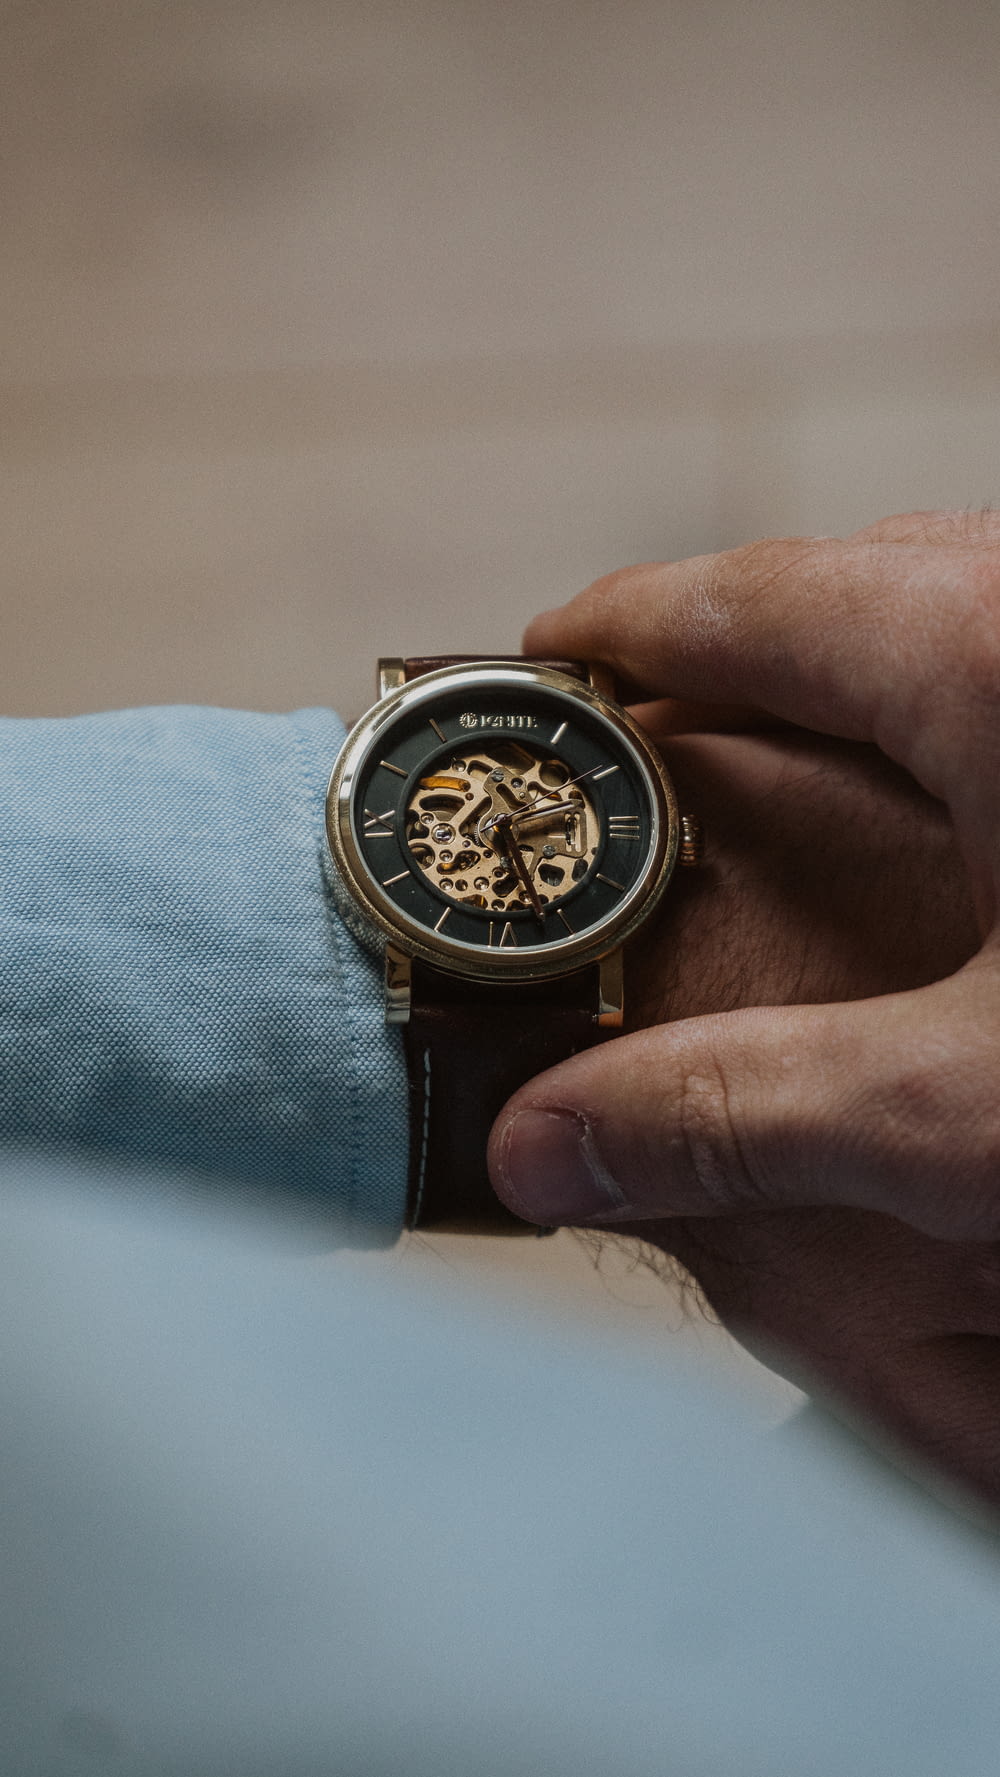 person wearing silver and gold chronograph watch